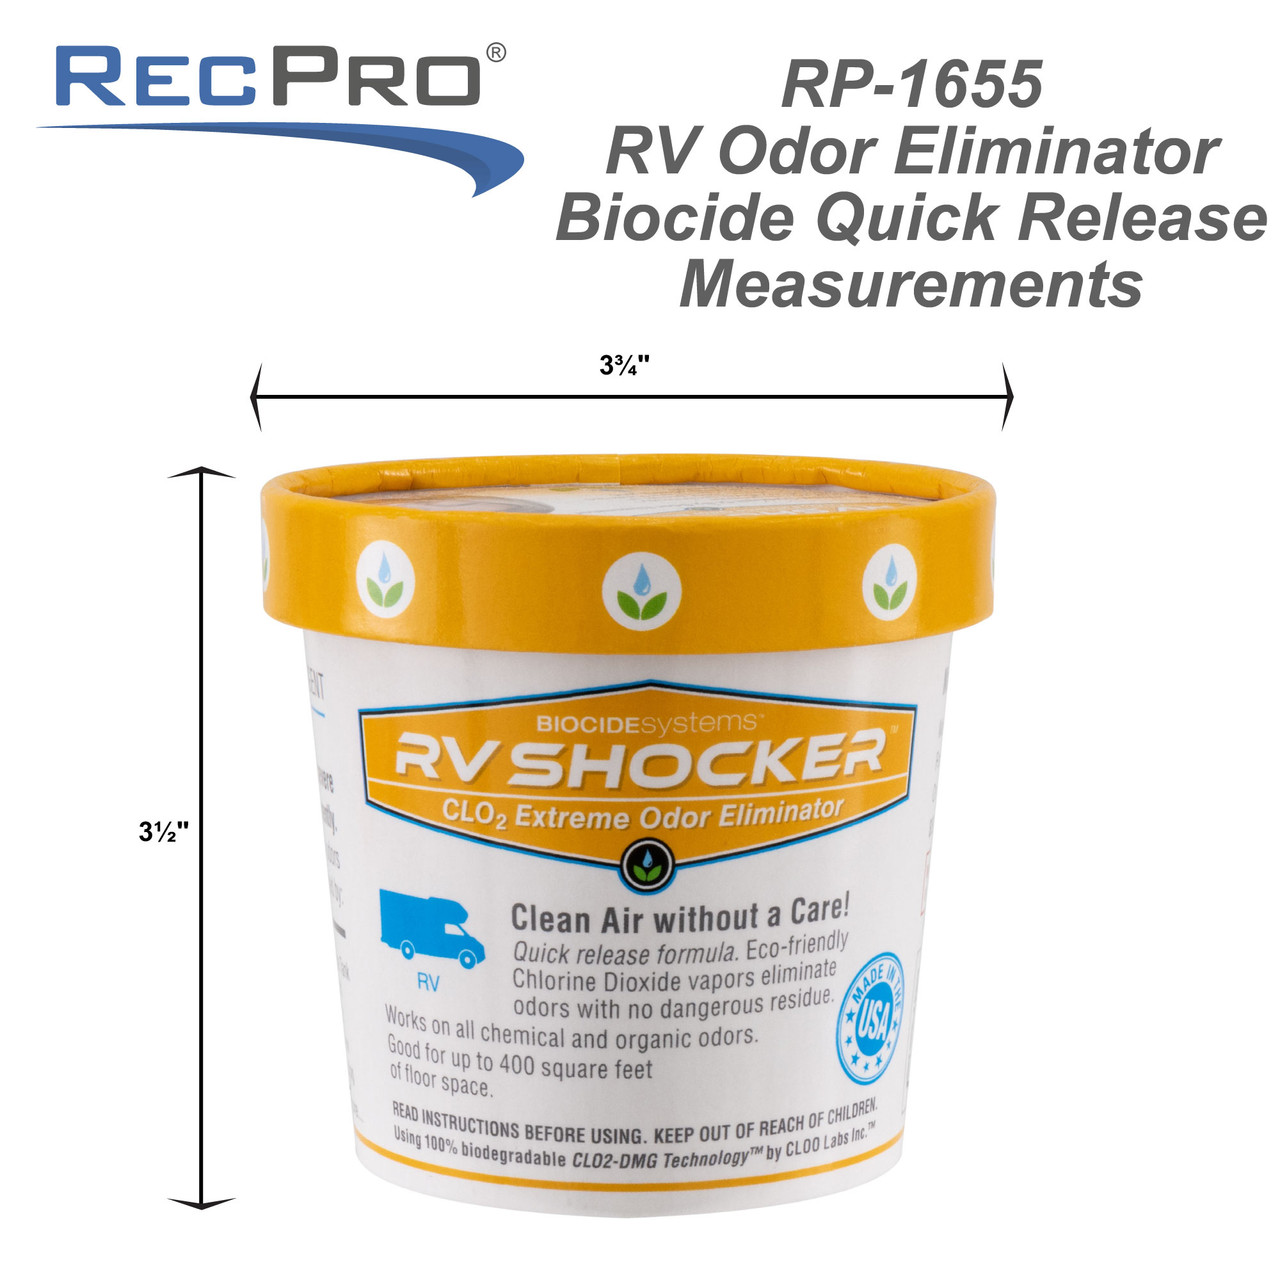 https://cdn11.bigcommerce.com/s-kwuh809851/images/stencil/1280x1280/products/2931/29532/RP-1655-RV-Odor-Eliminator-Biocide-Quick-Release-Measurements__45575.1660837113.jpg?c=2&imbypass=on